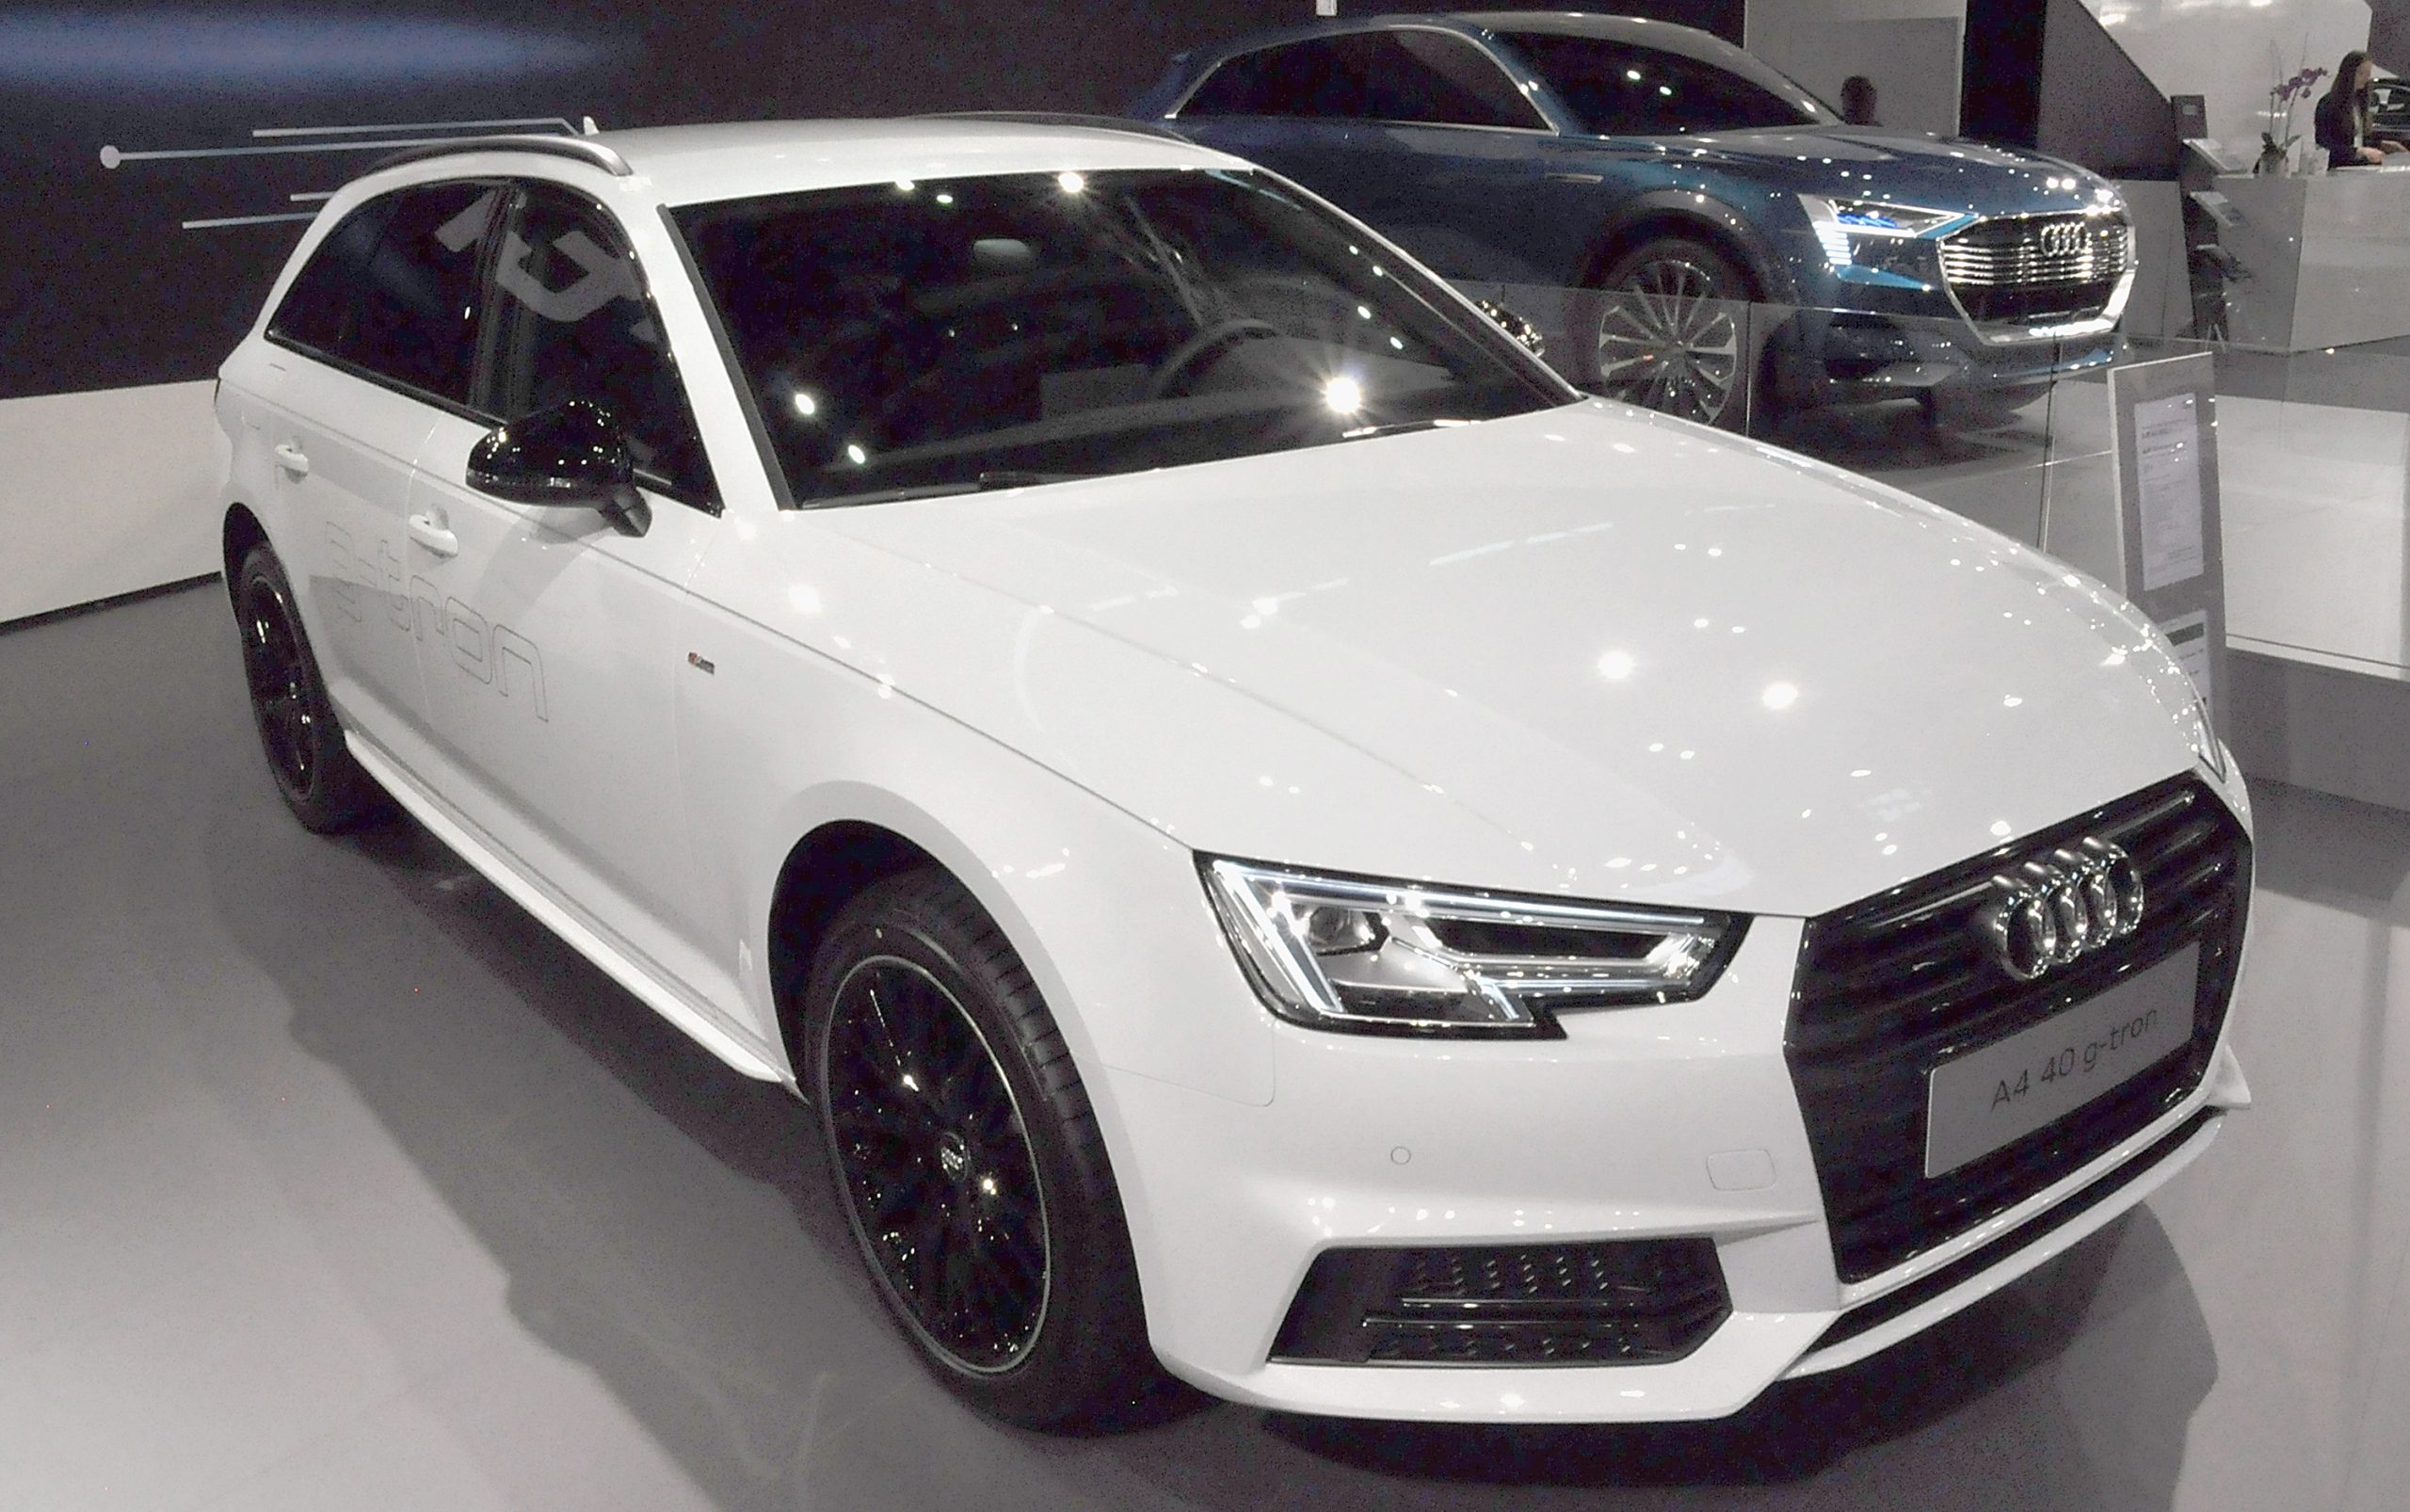 A white Audi A4 on display at an auto show